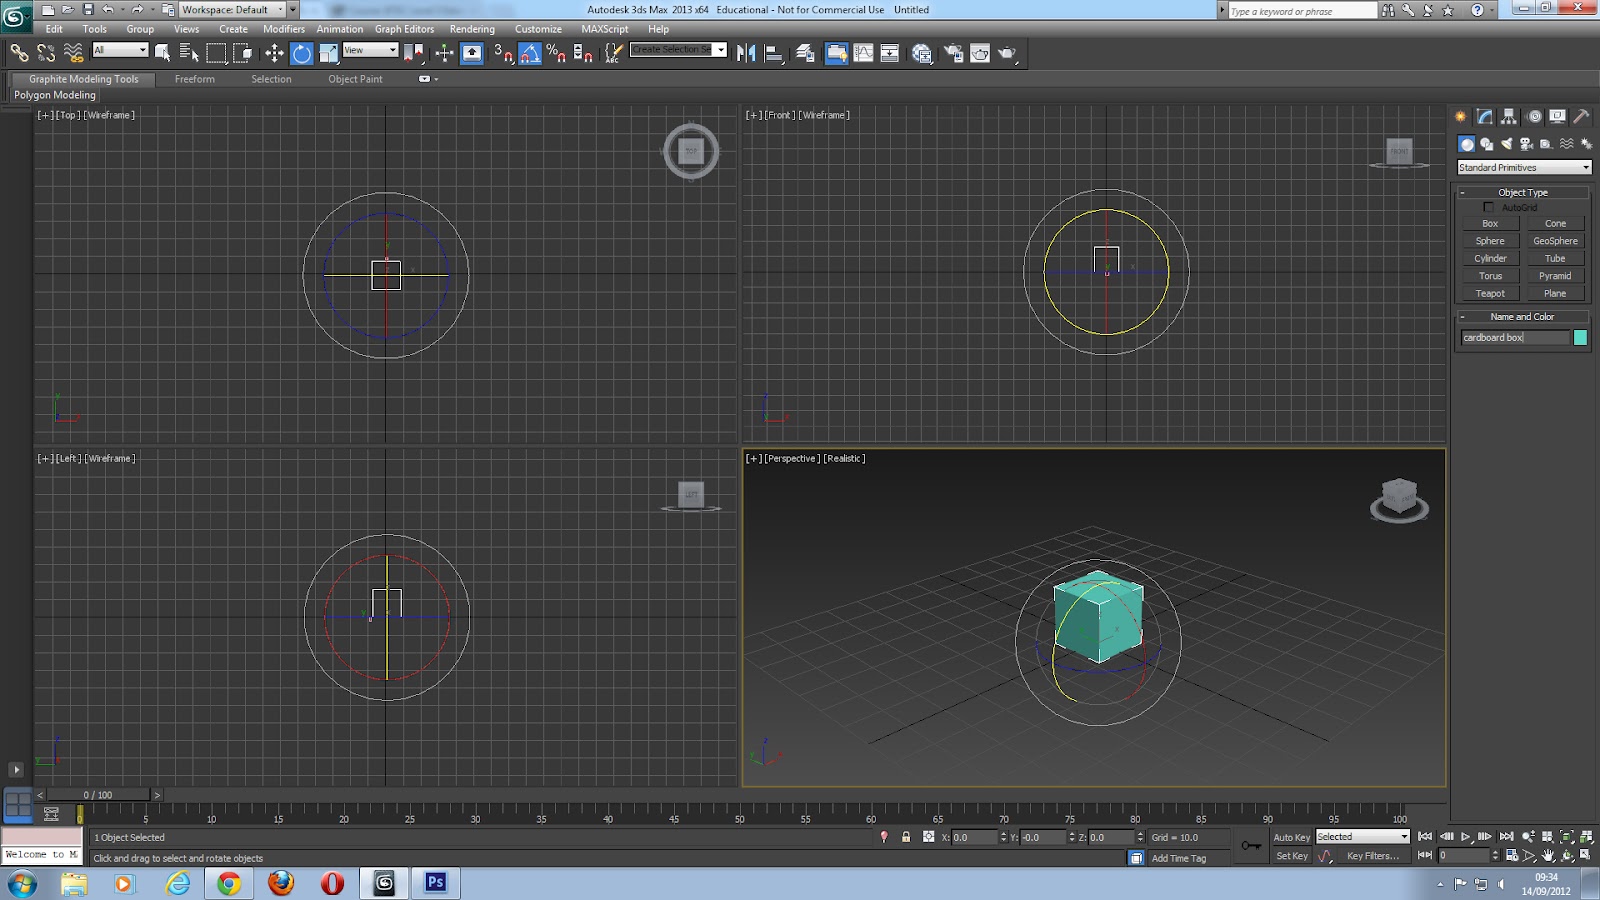 3ds max scene security tools. 3ds Max 1991. Select and rotate в 3ds Max. Graphite 3ds Max. 3ds модель инструмента.